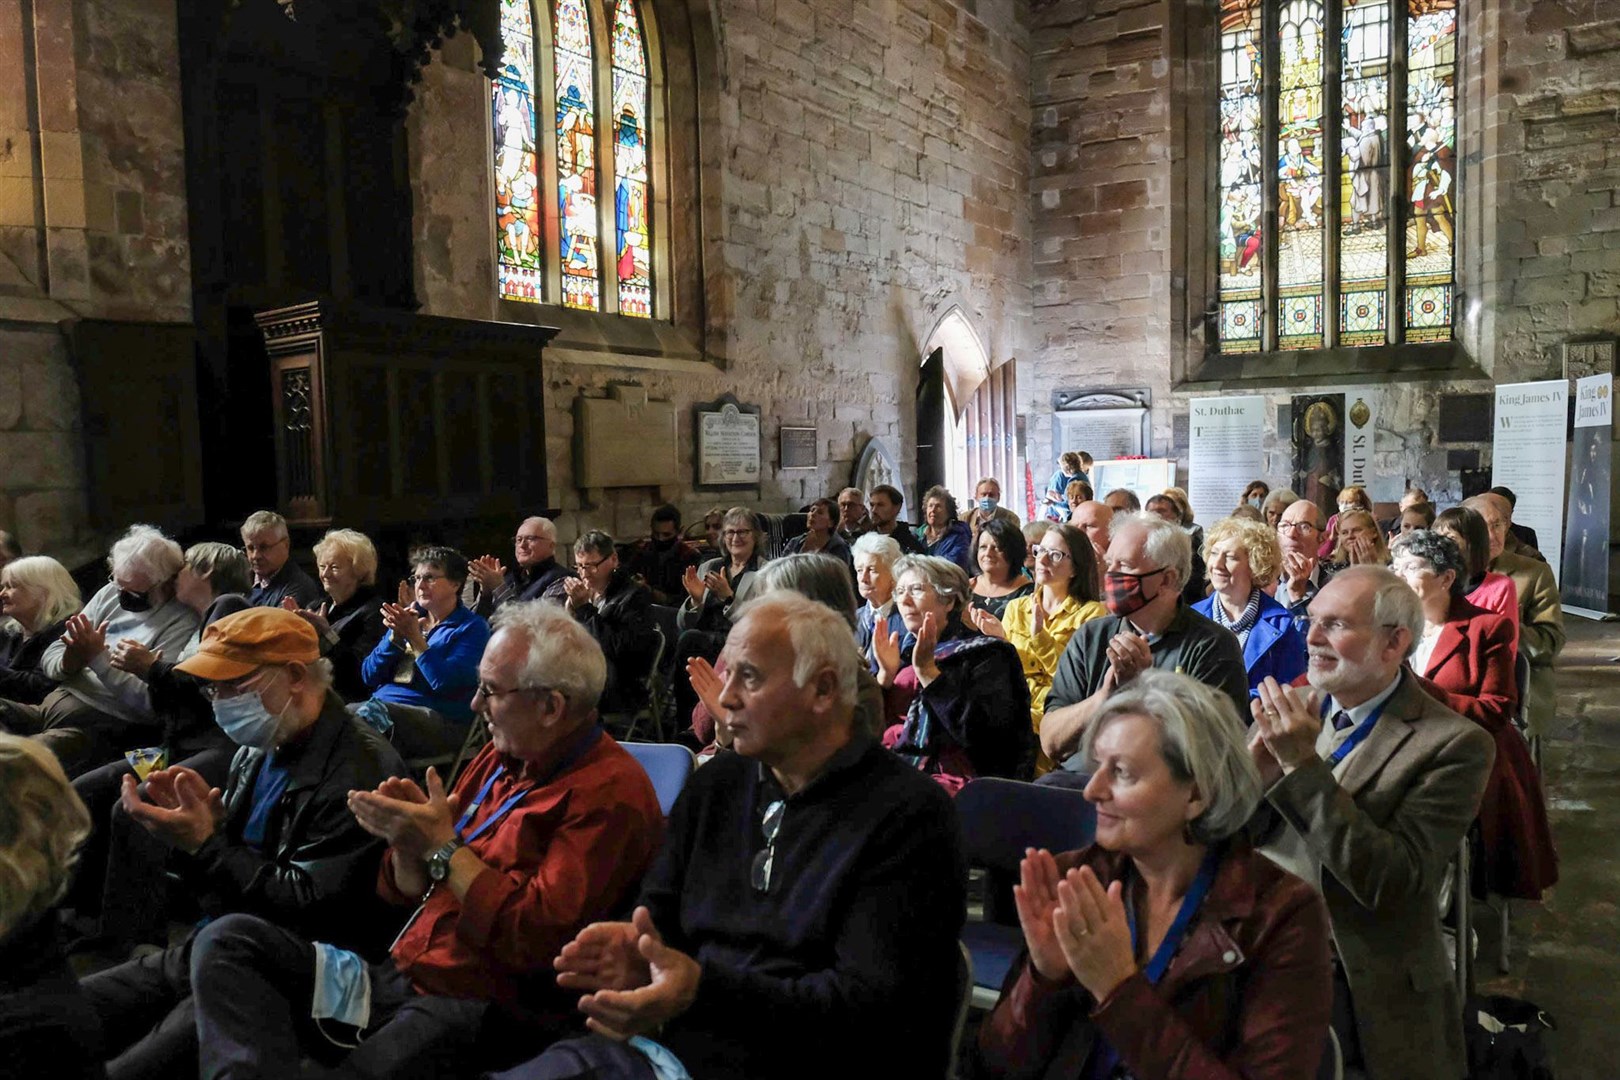 An appreciative audience at the Collegiate Church. Picture: Mark Janes